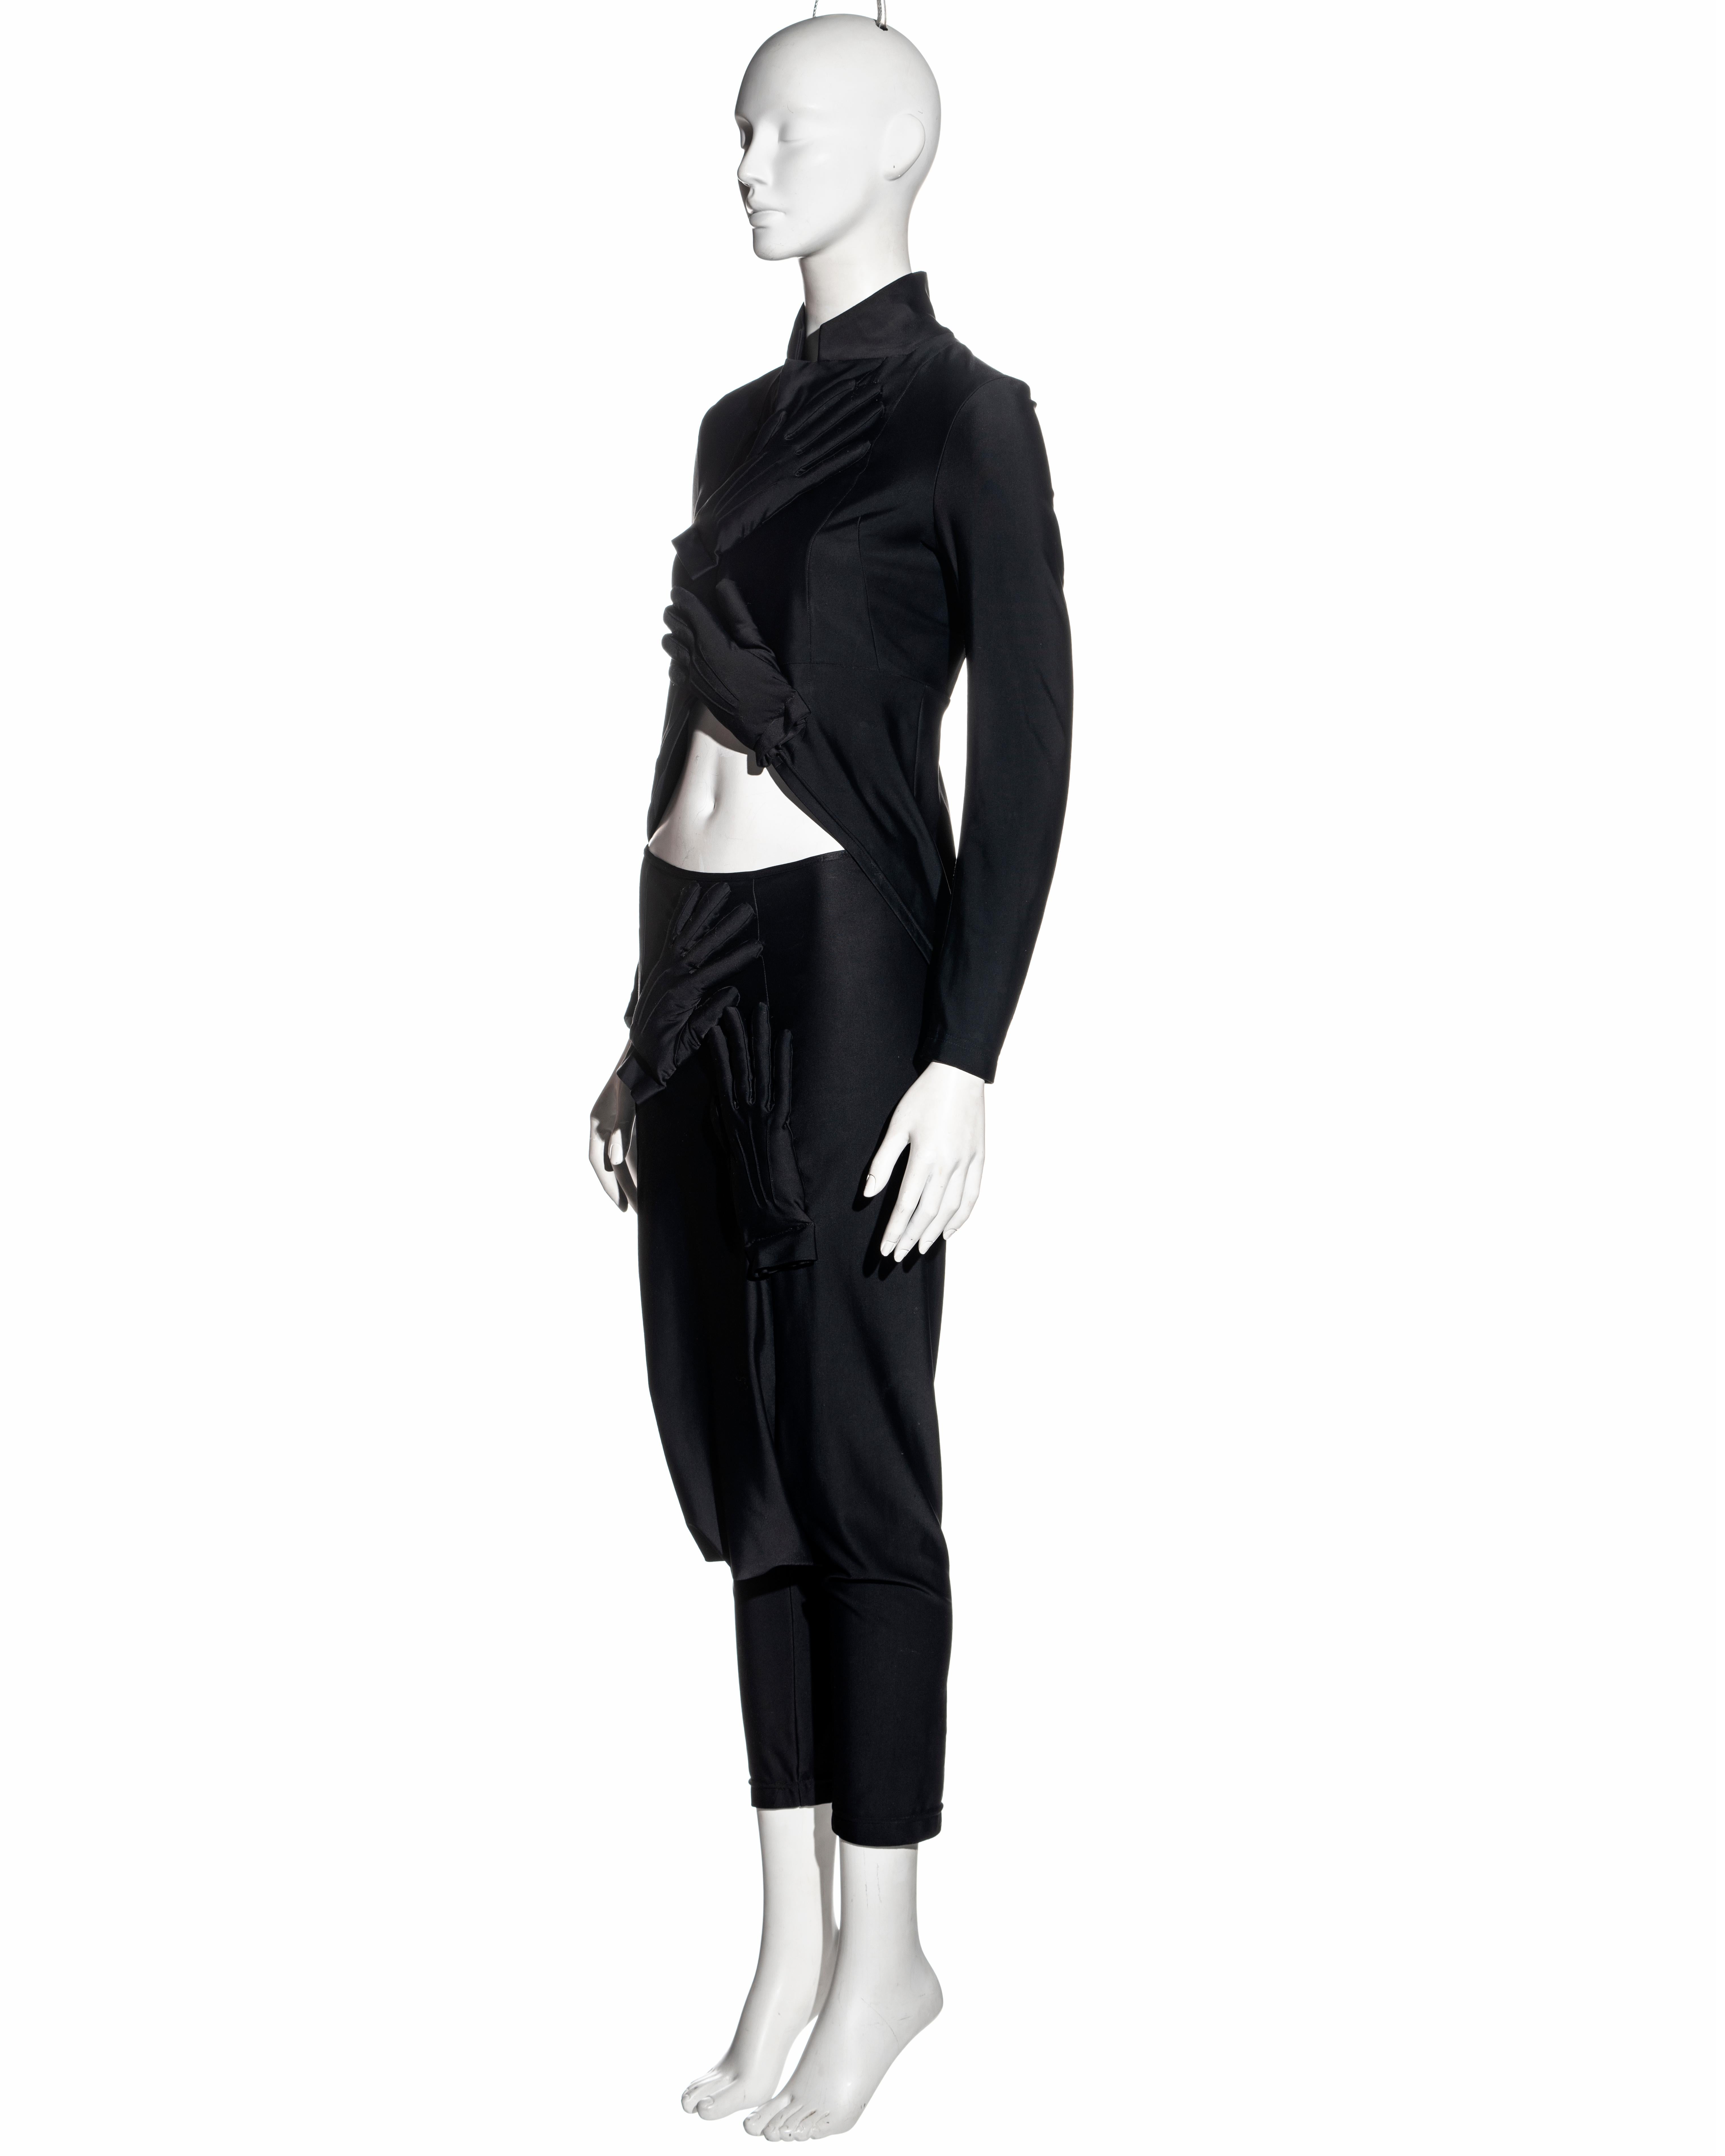 Comme des Garçons black lycra jacket and pants with padded hand motifs, fw 2007 2